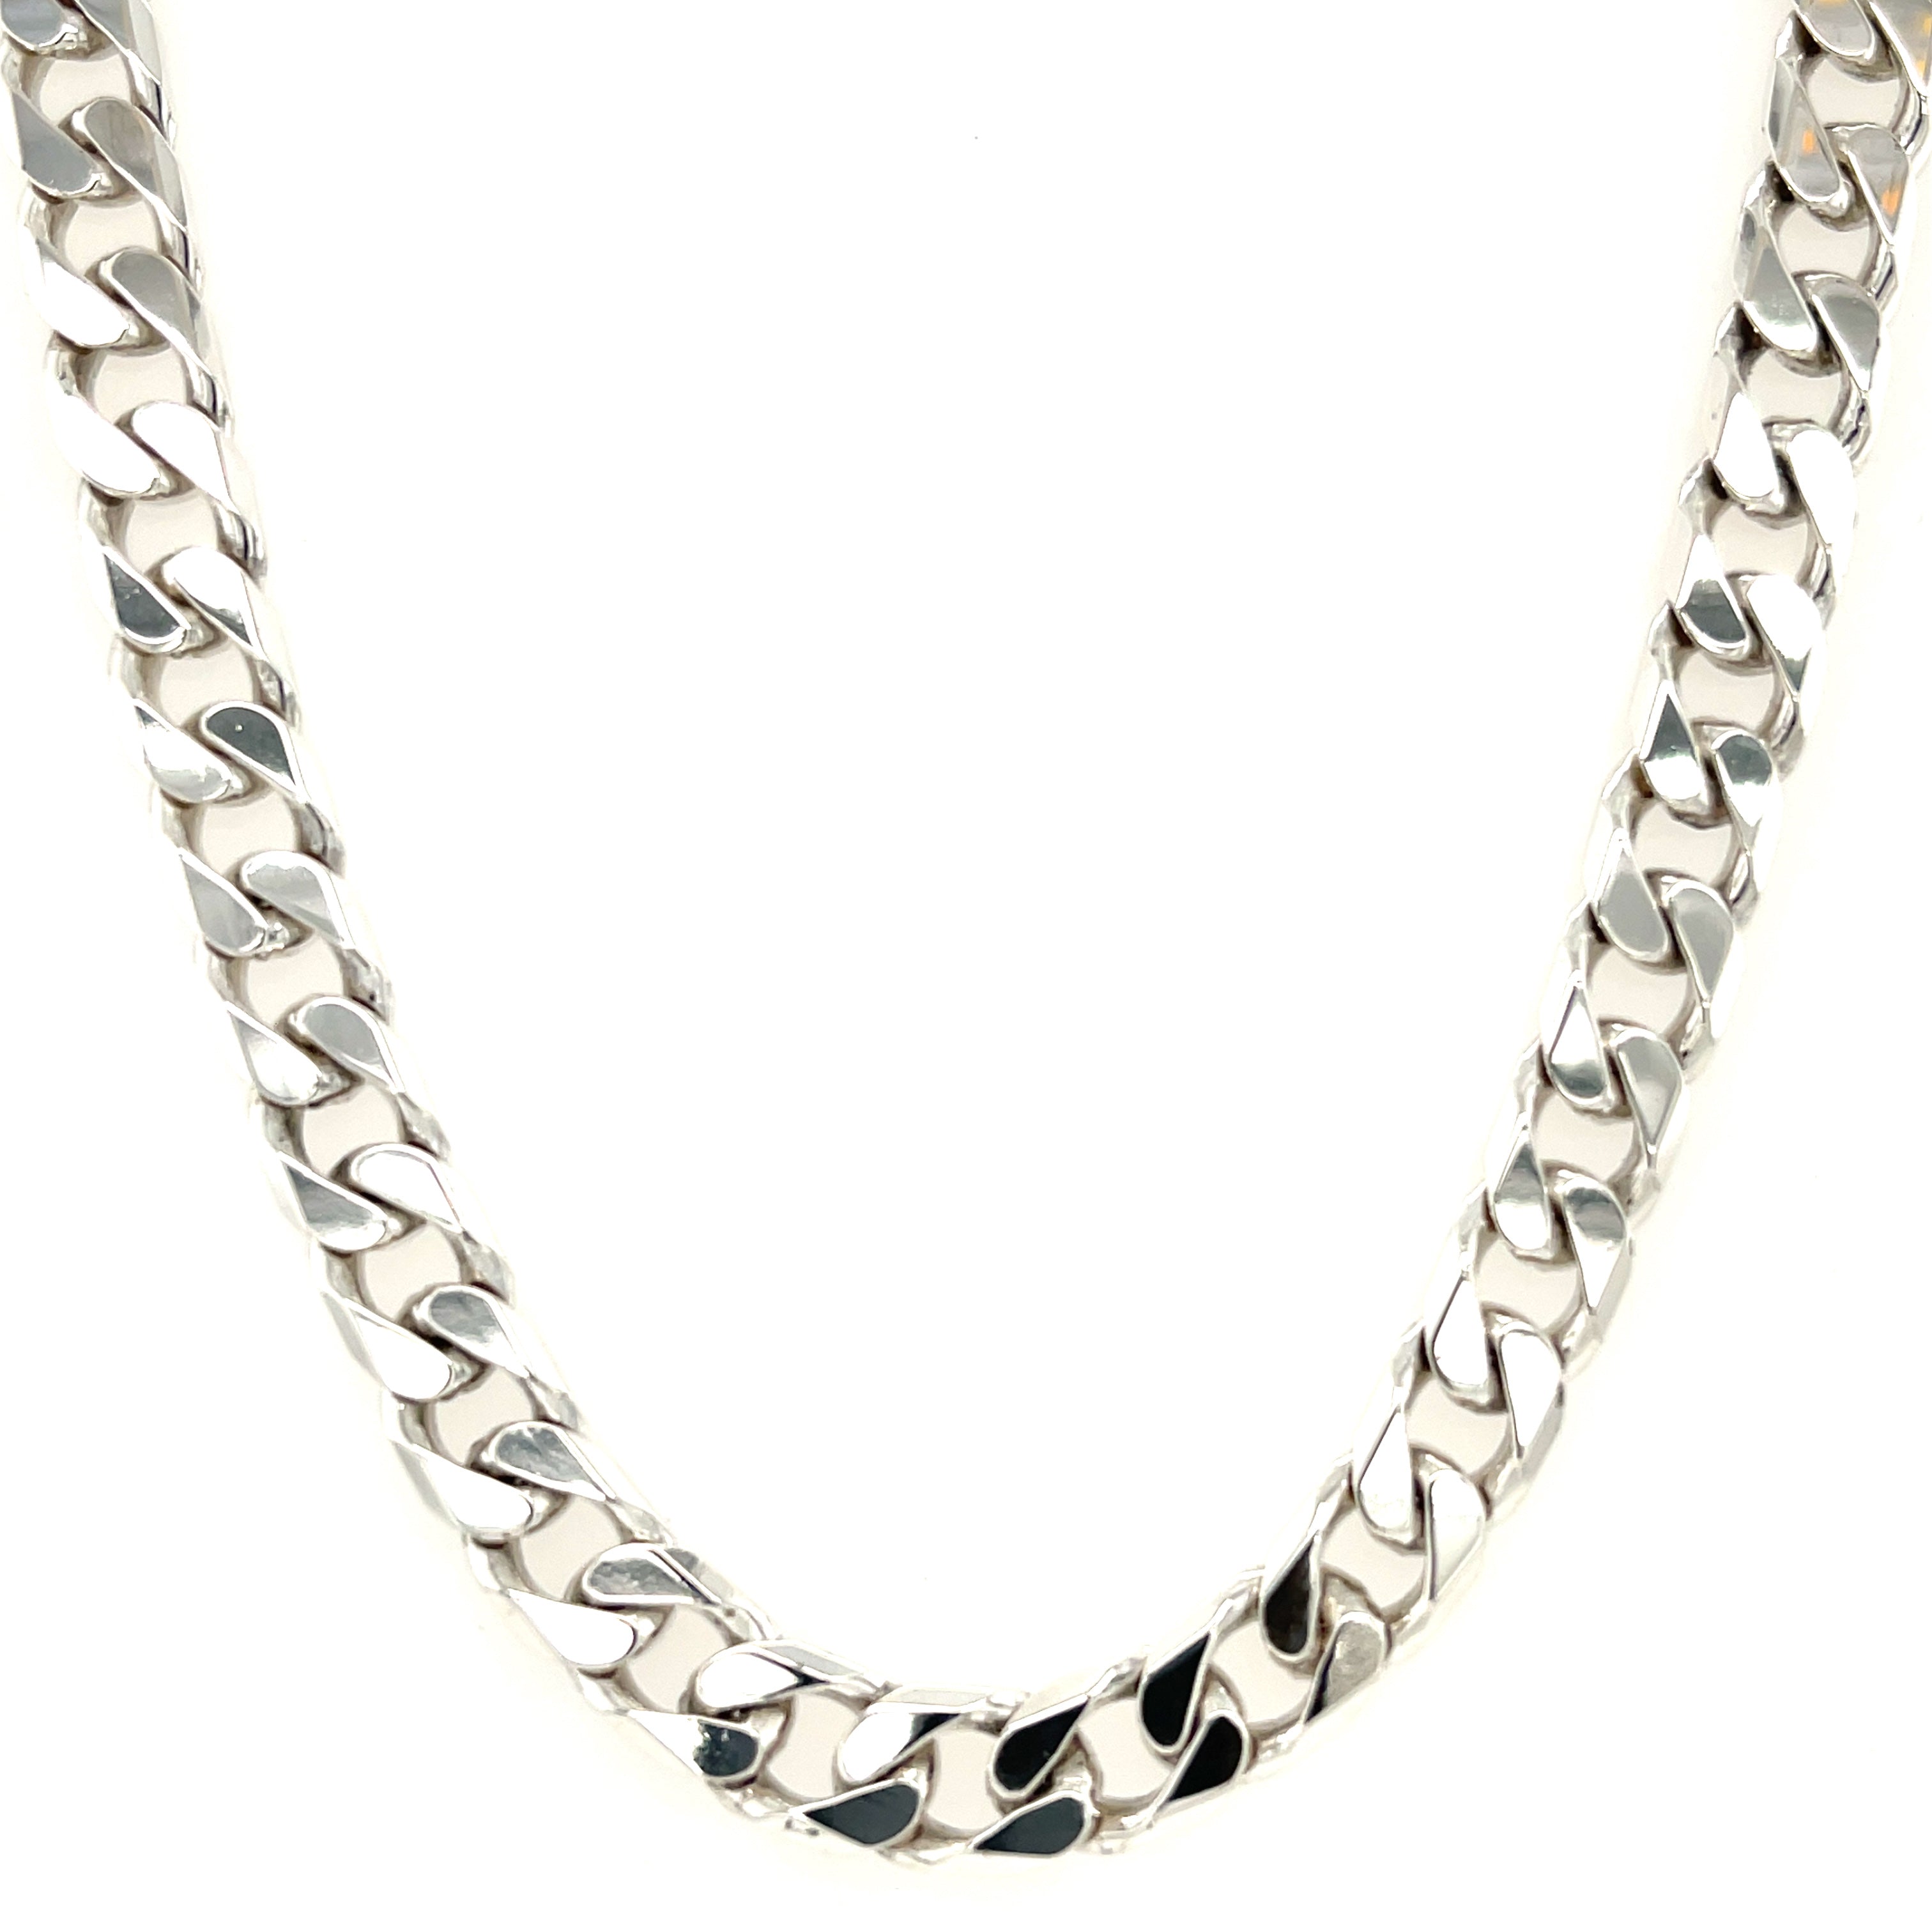 Sterling Silver (925) 20 Inch Classic Curb Link Chain - 48.57g SOLD